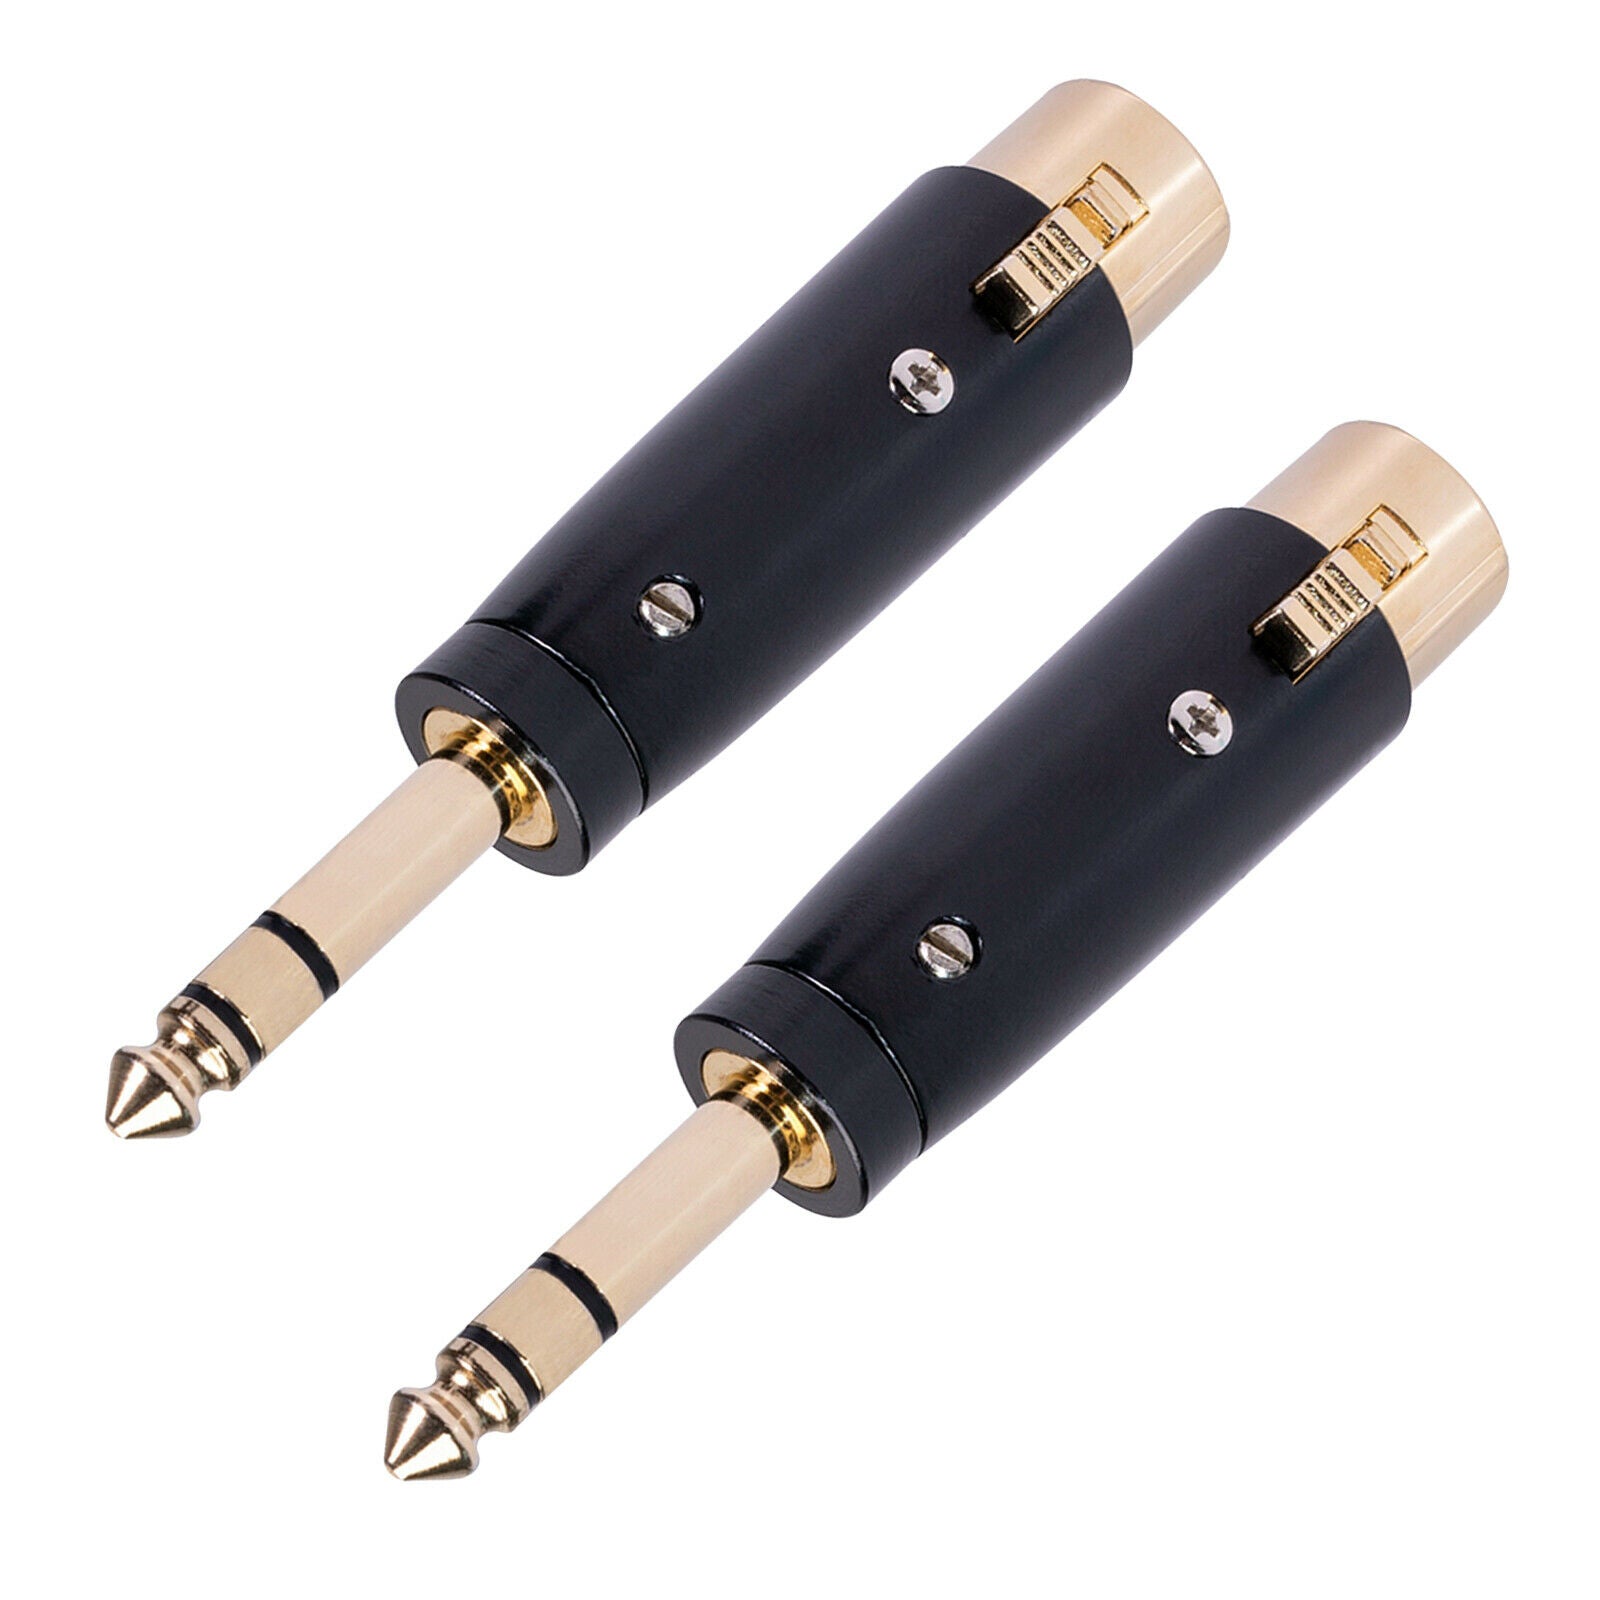 2pcs Zinc Alloy Stereo Mic Audio Cable Cord Adapter Converter Connector